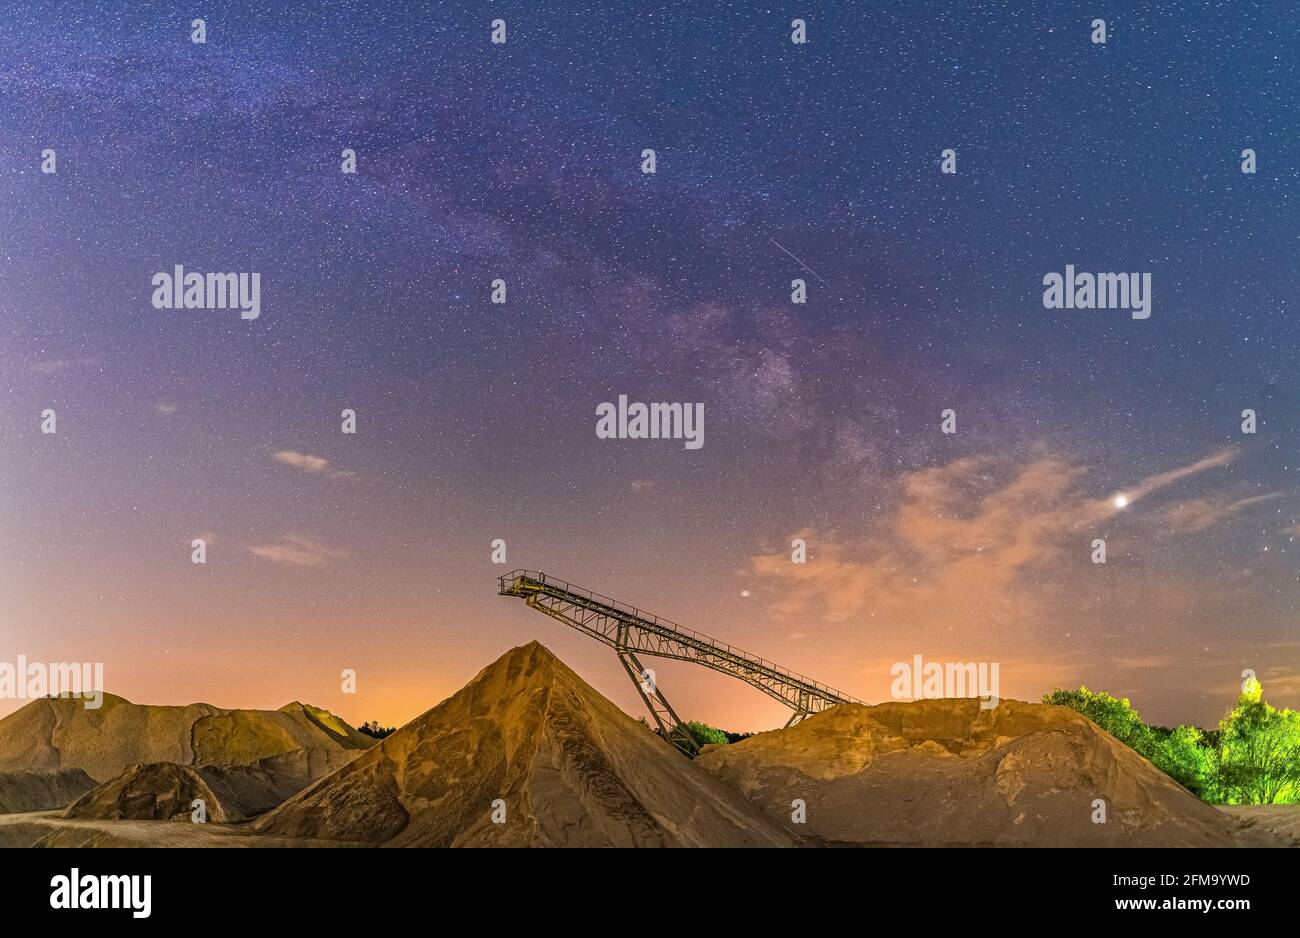 Conveyor bridge at night and the milky way, watching the stars at a construction area. Stock Photo